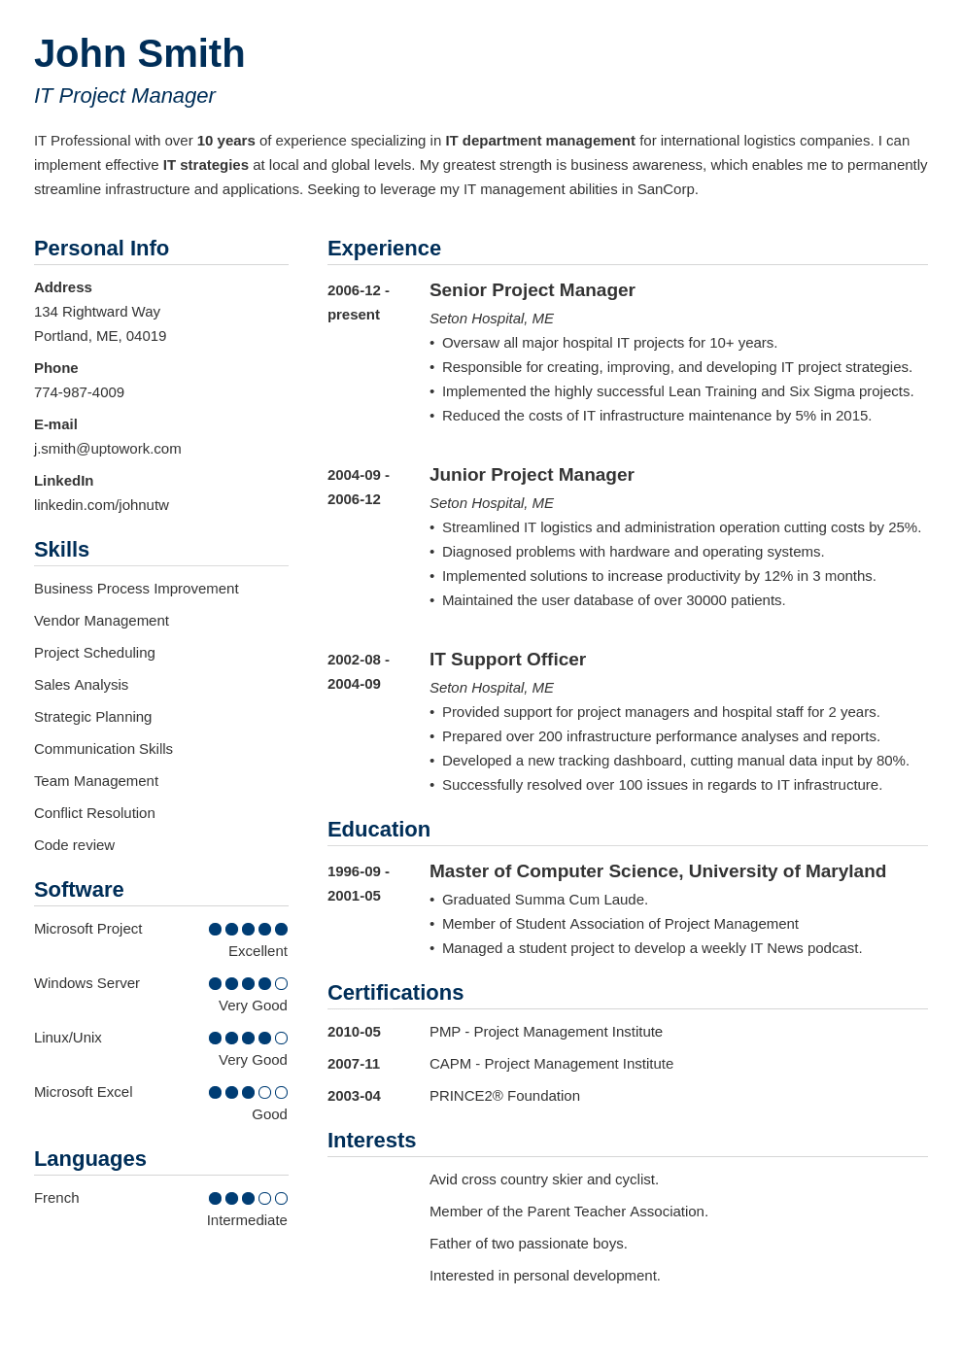 resume Experiment: Good or Bad?